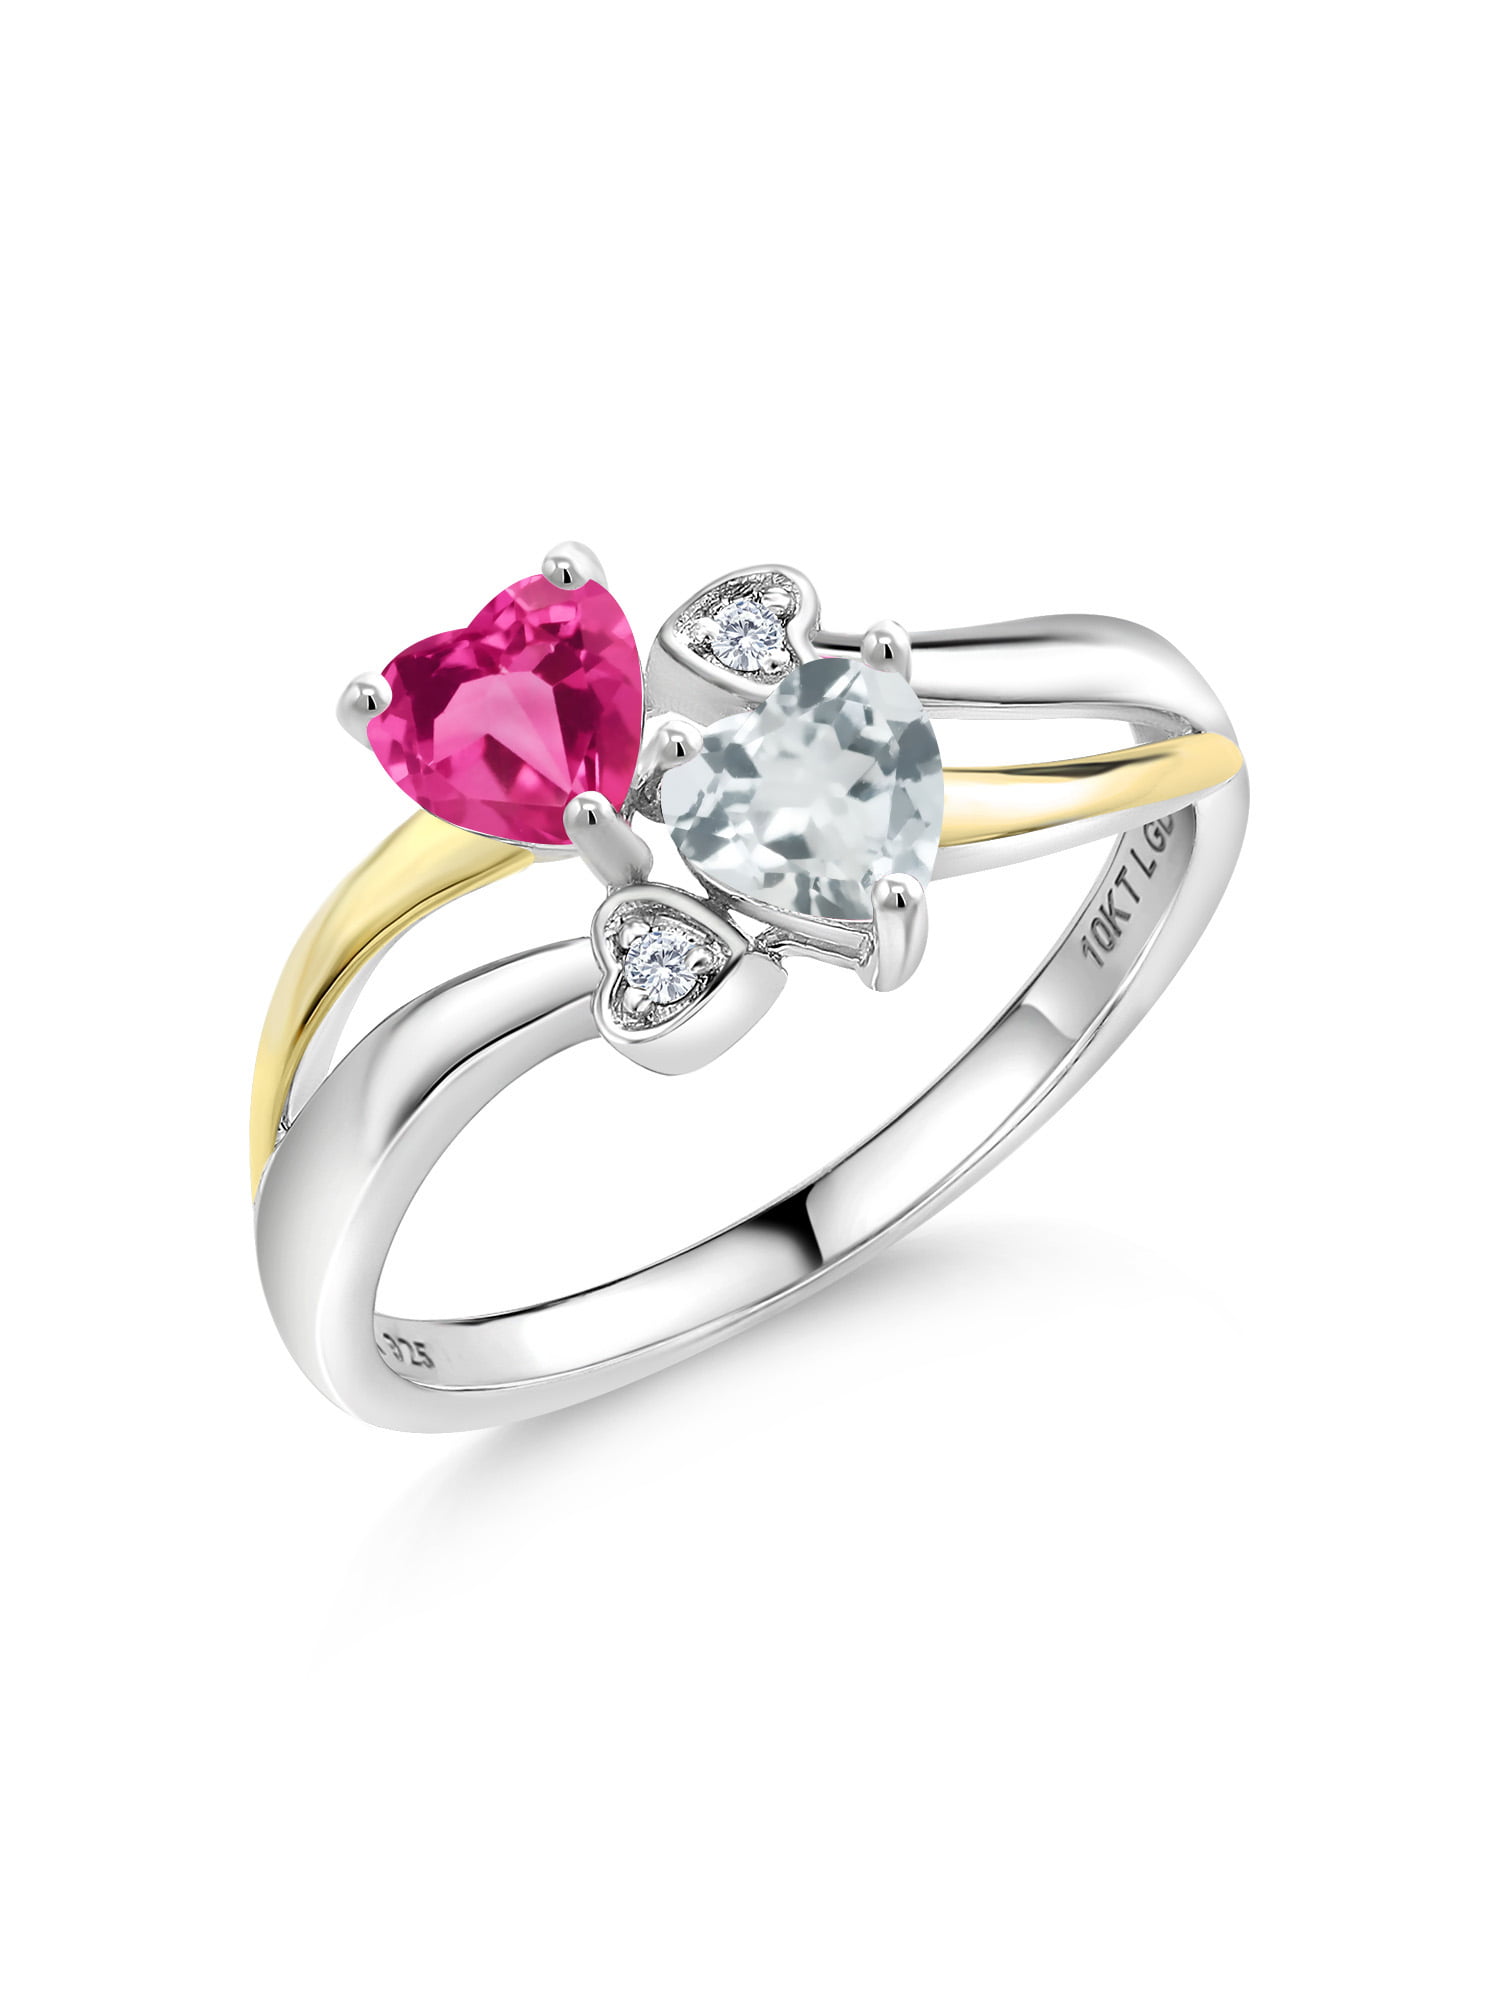 Gem Stone King 1.04 Ct Pink Created Sapphire White Created Sapphire 925 Sterling Silver Ring 